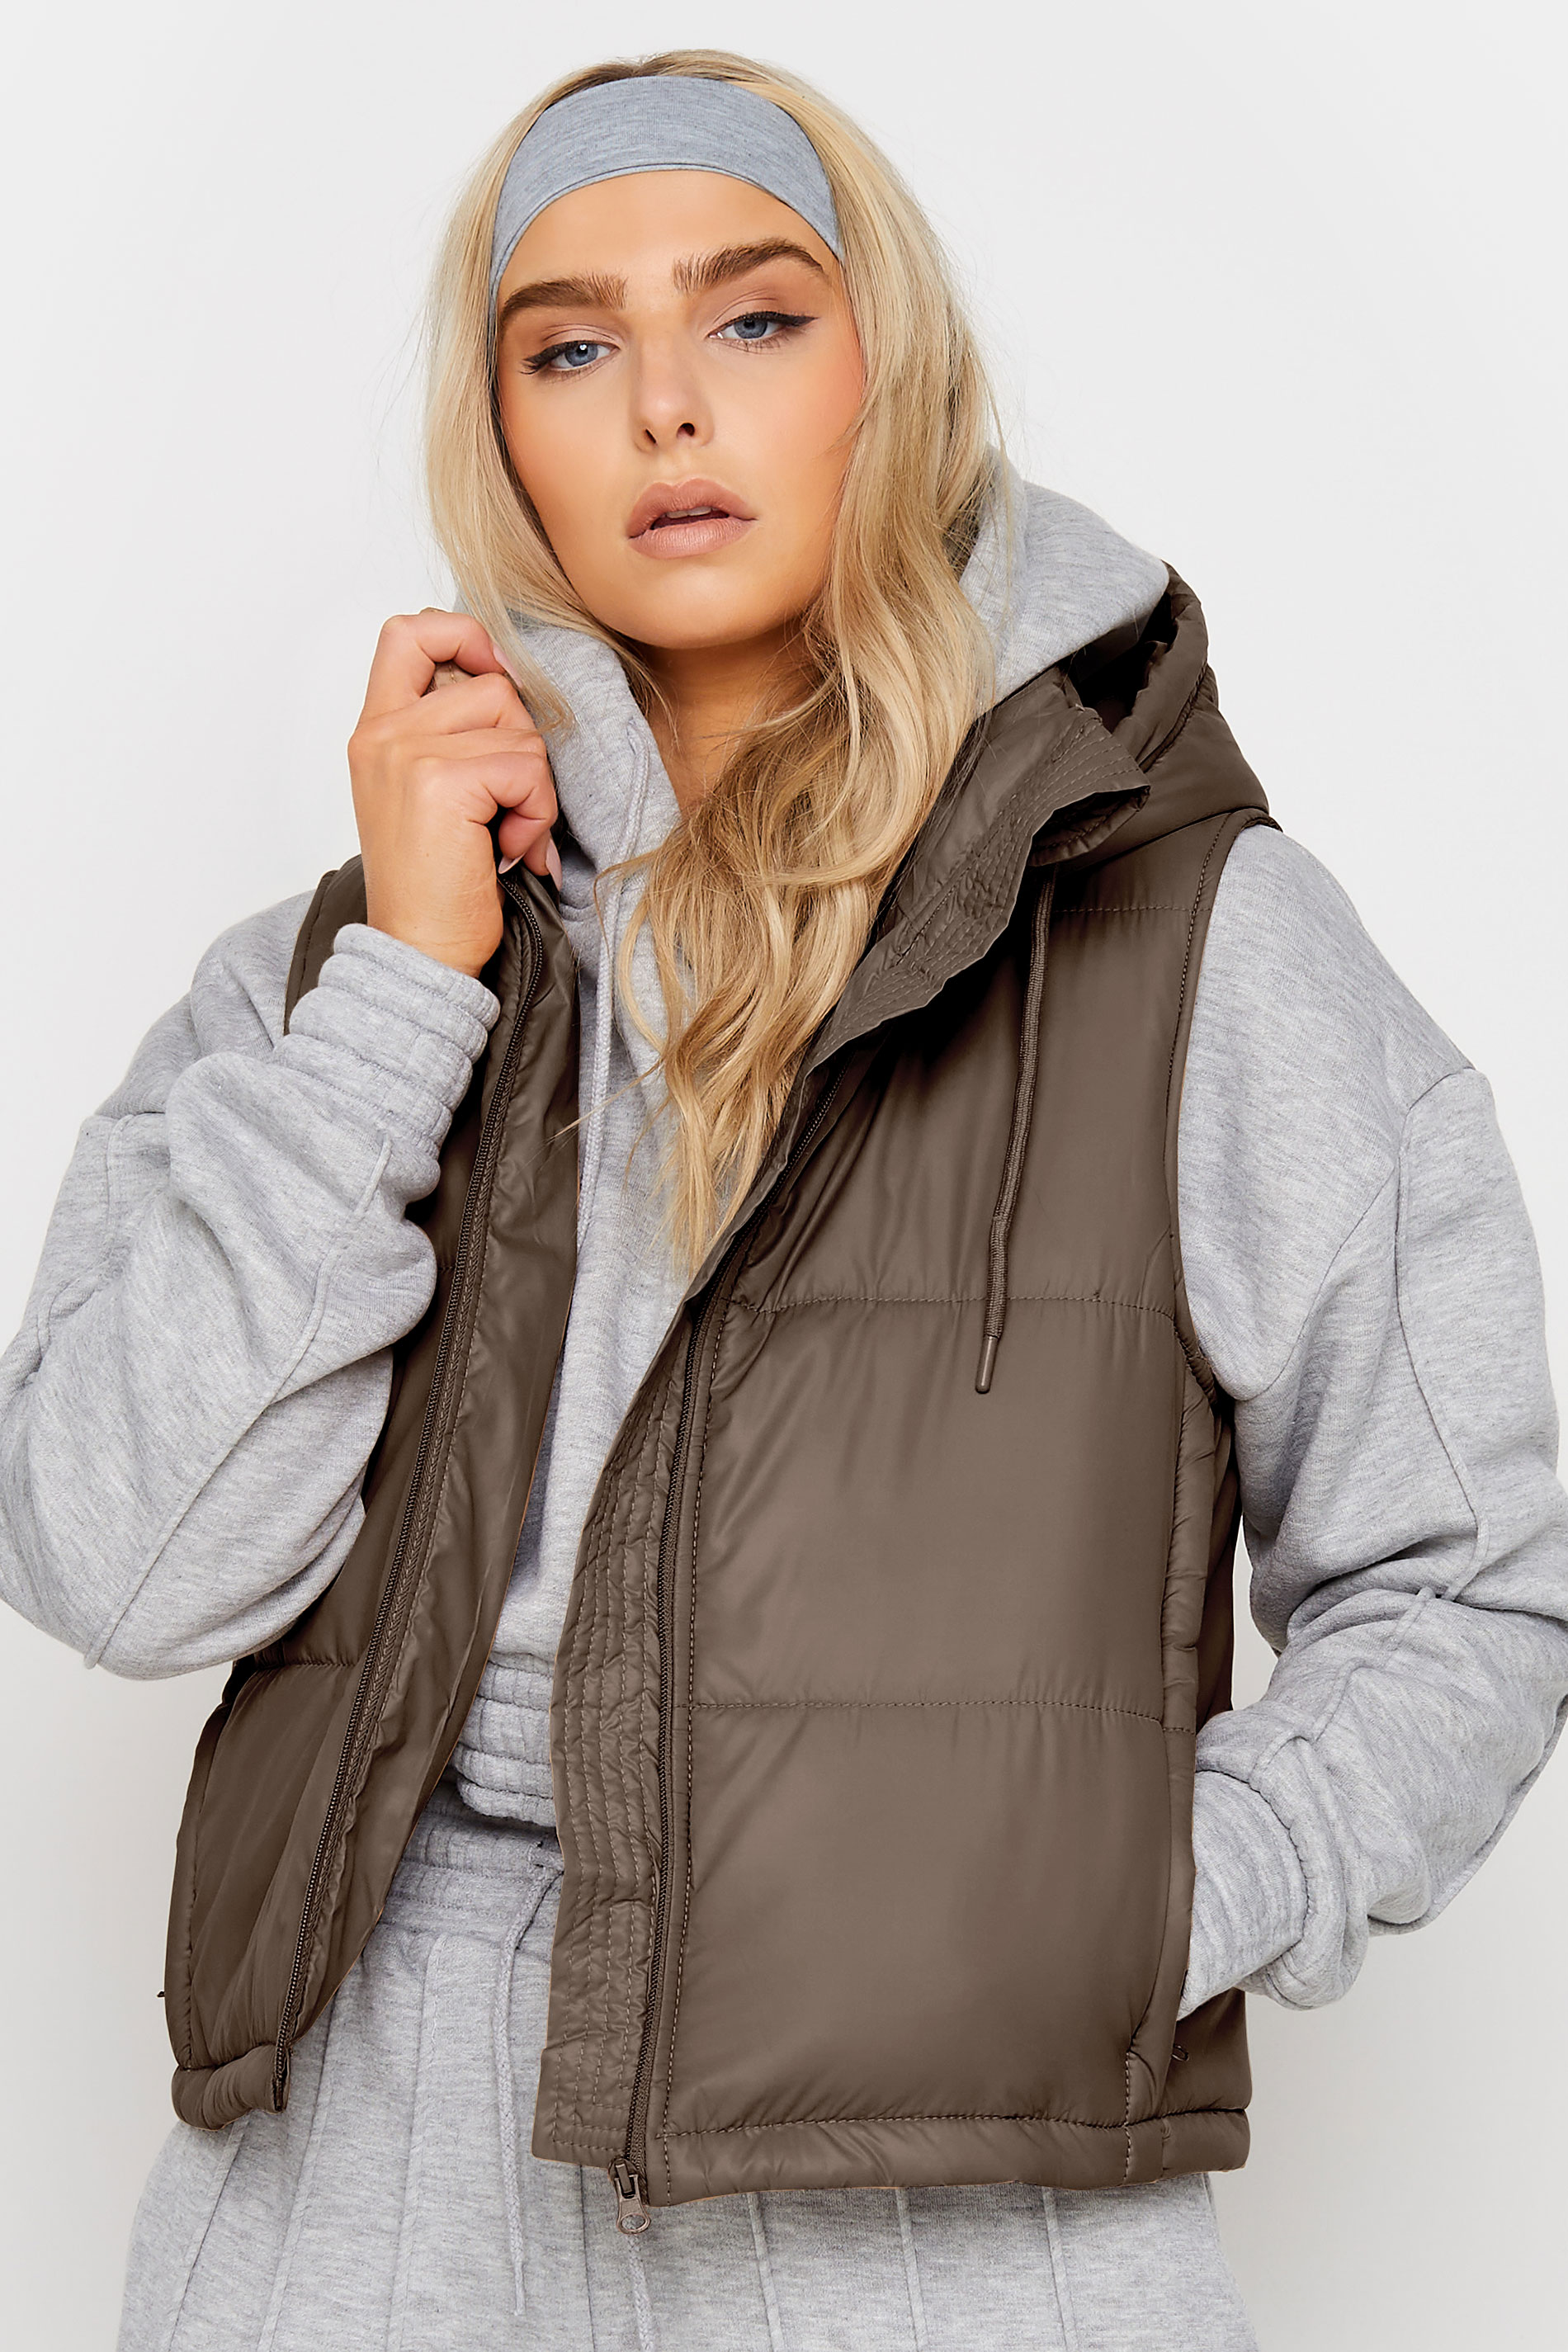 Chocolate Brown Hooded Cropped Gilet | PixieGirl 1